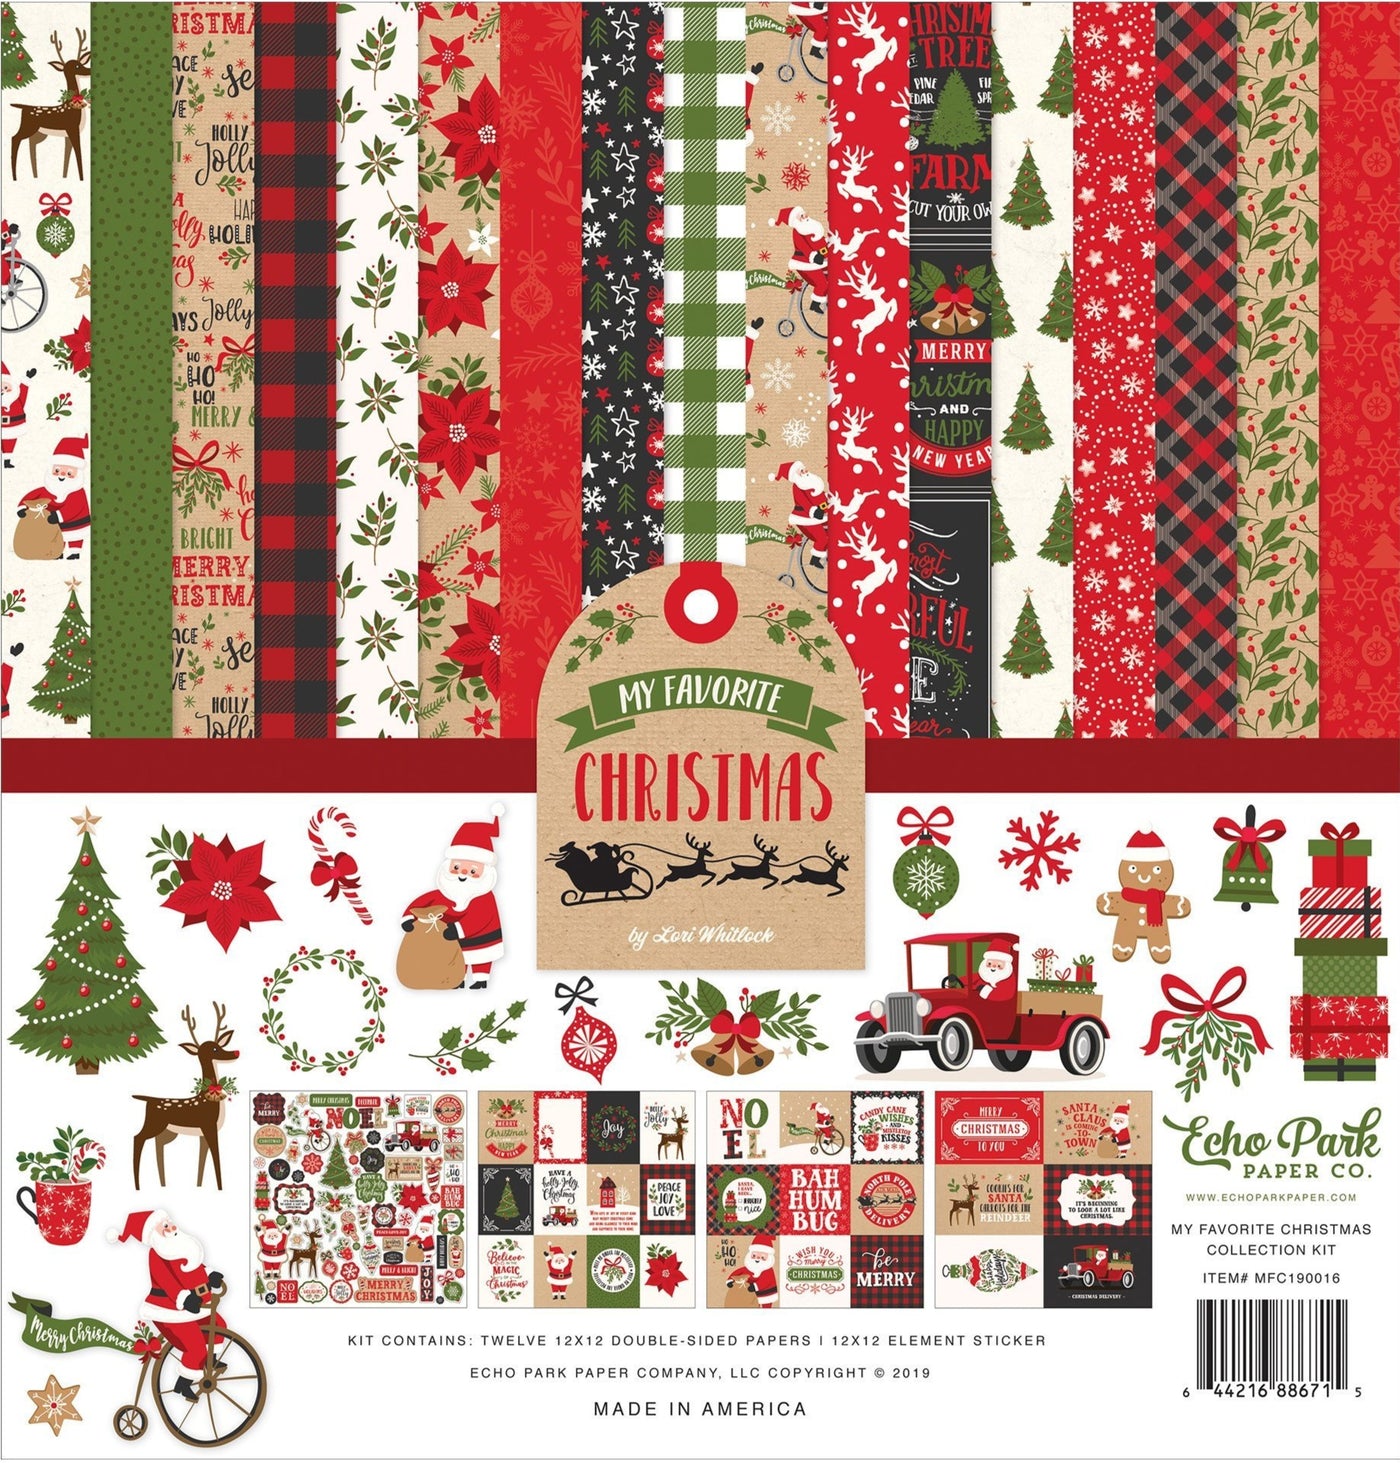 My Favorite Christmas Page Kit Collection by Echo Park Paper Co.